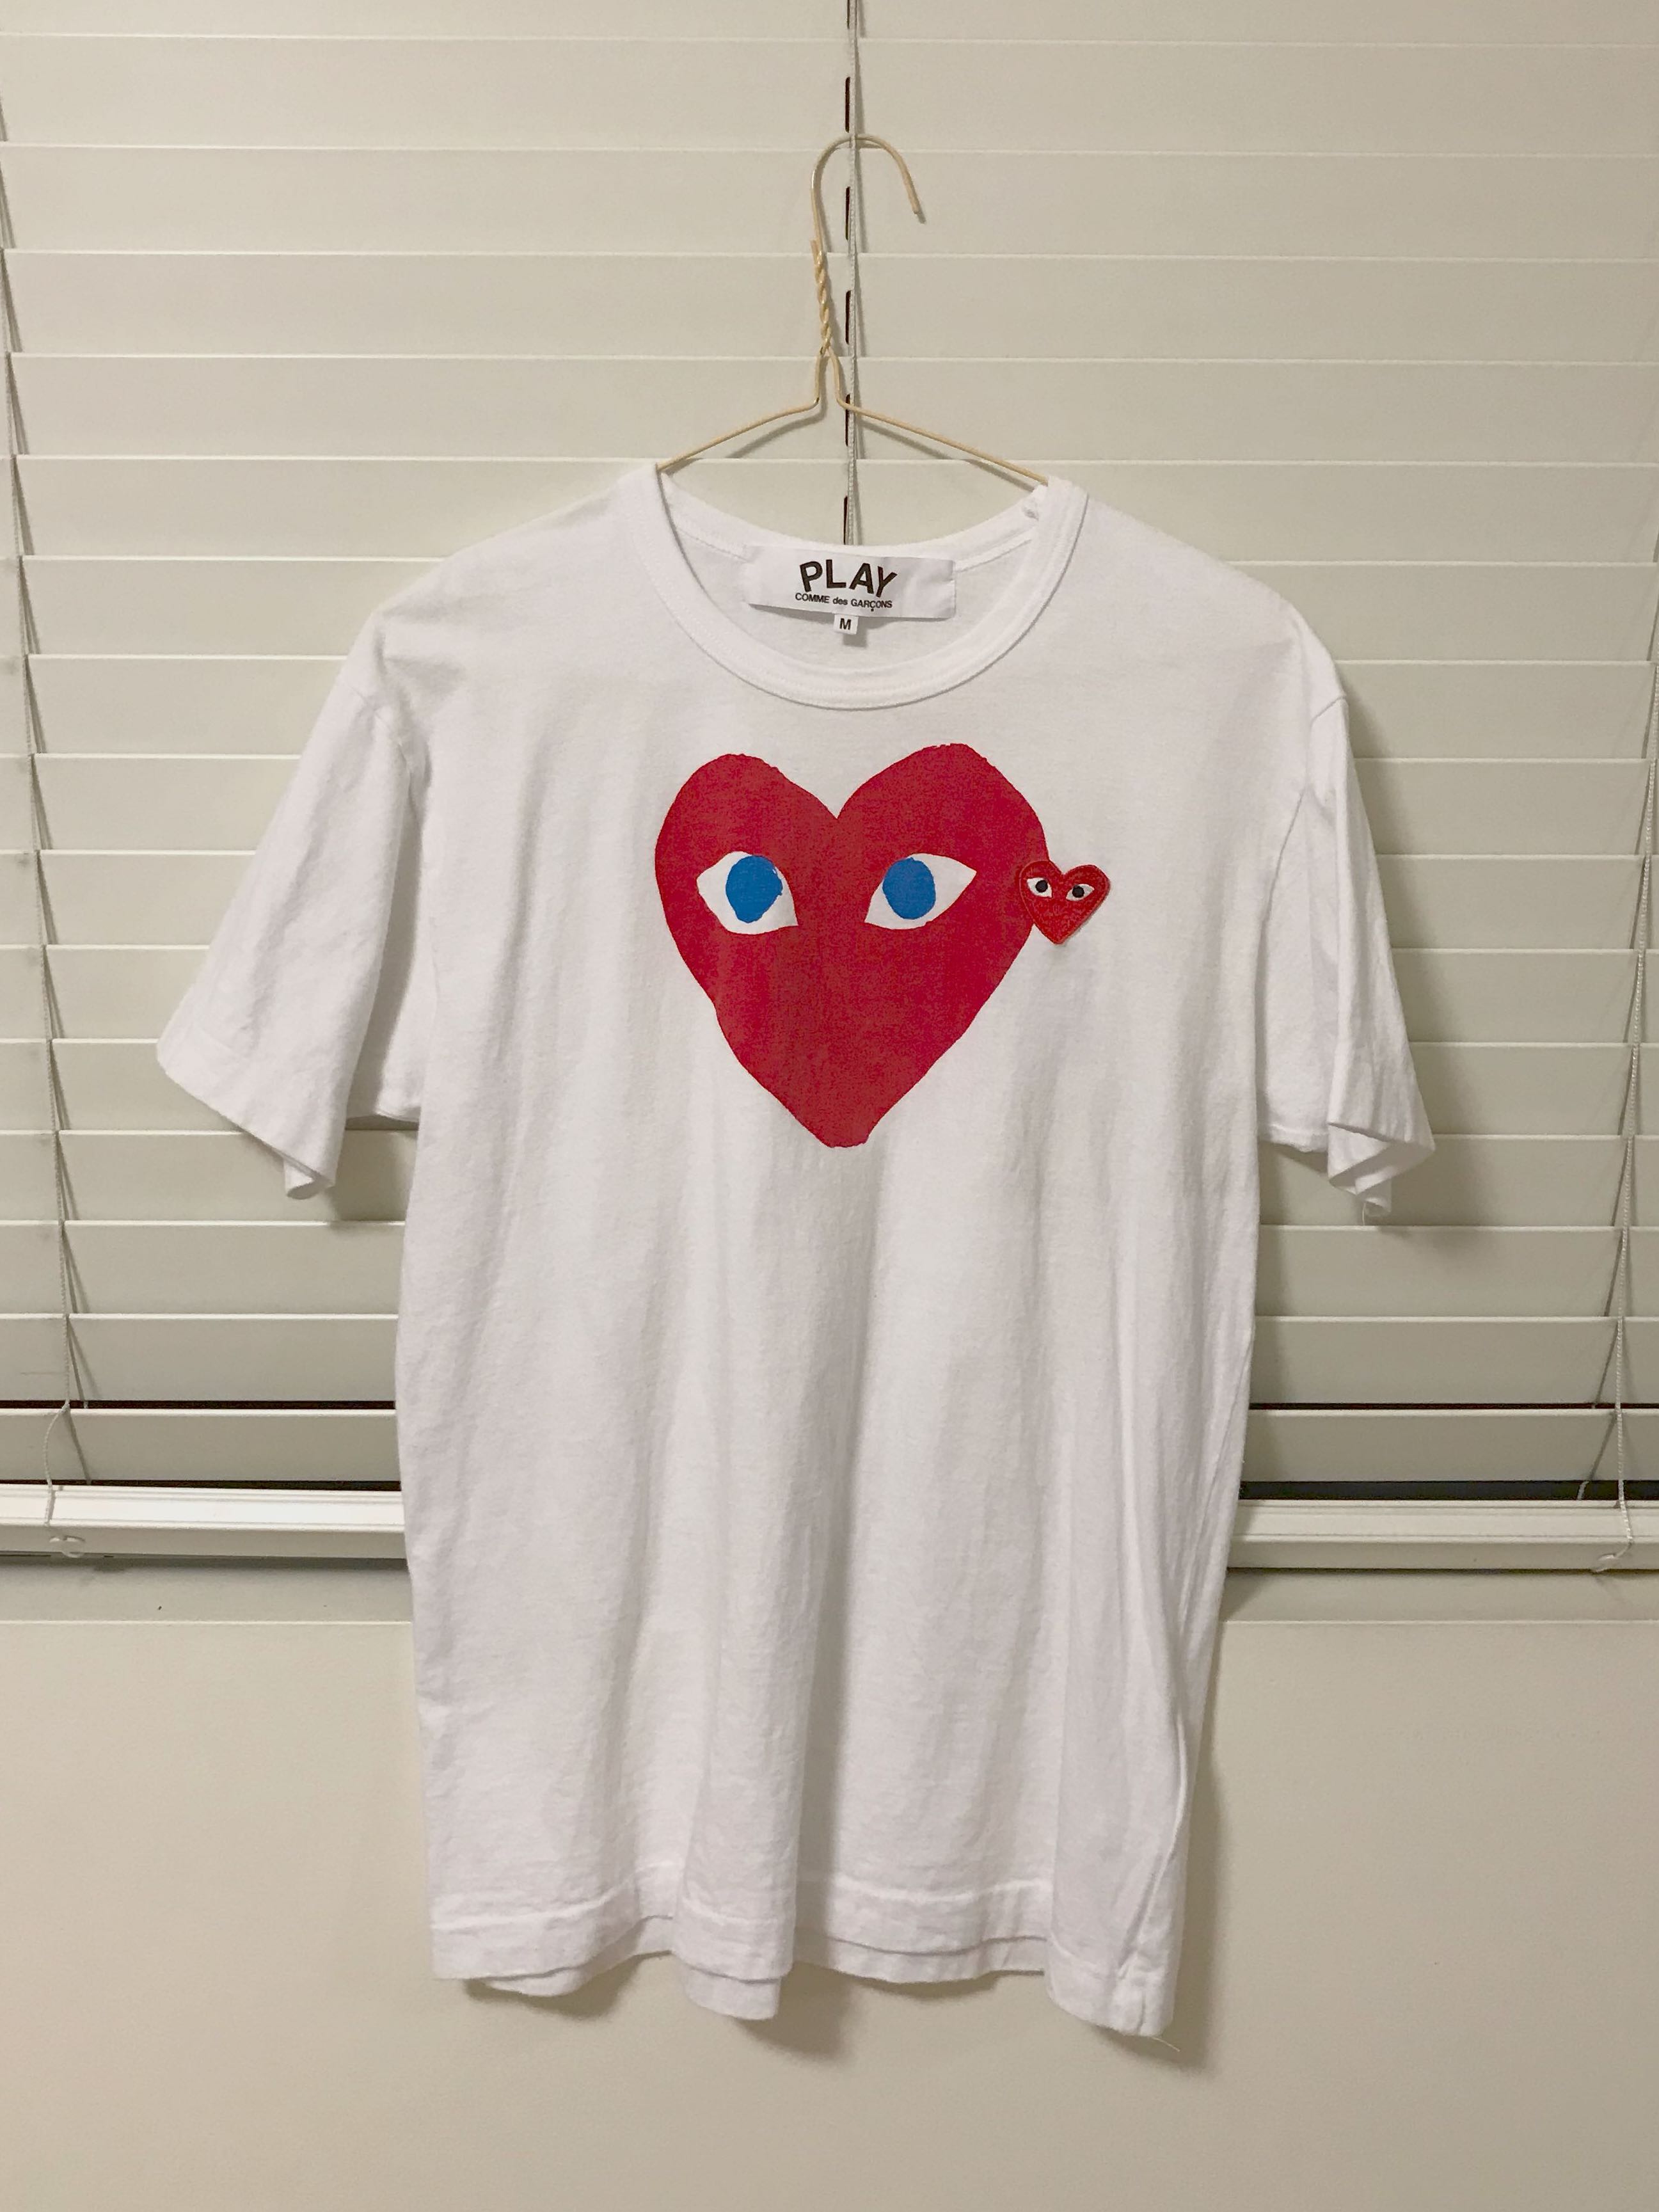 cdg play red heart t shirt